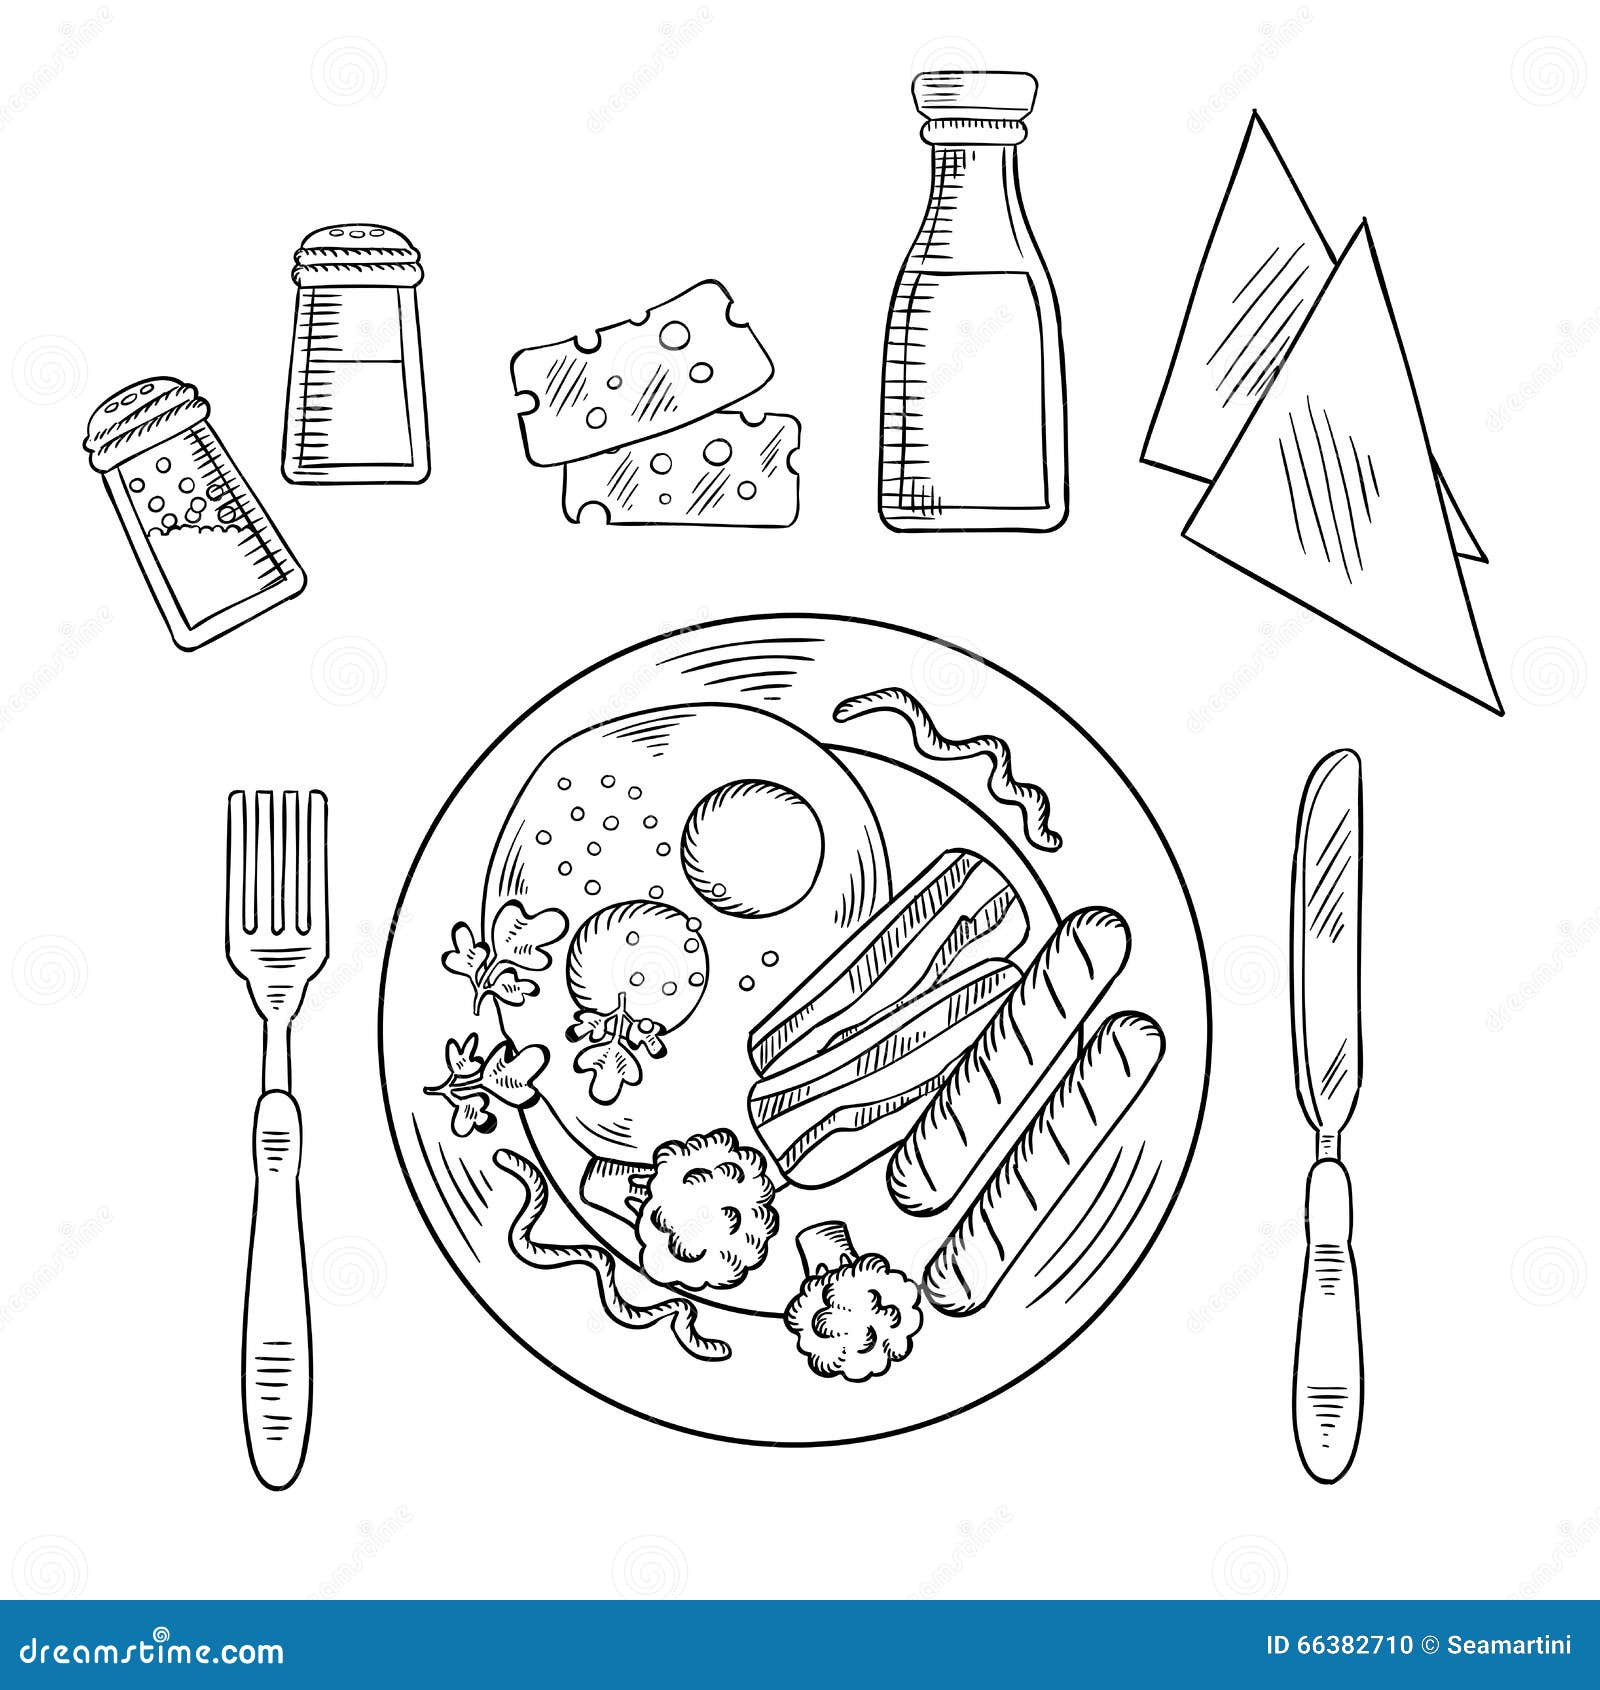 Cleaning Plate With Sponge Free Vector and graphic 76966088.